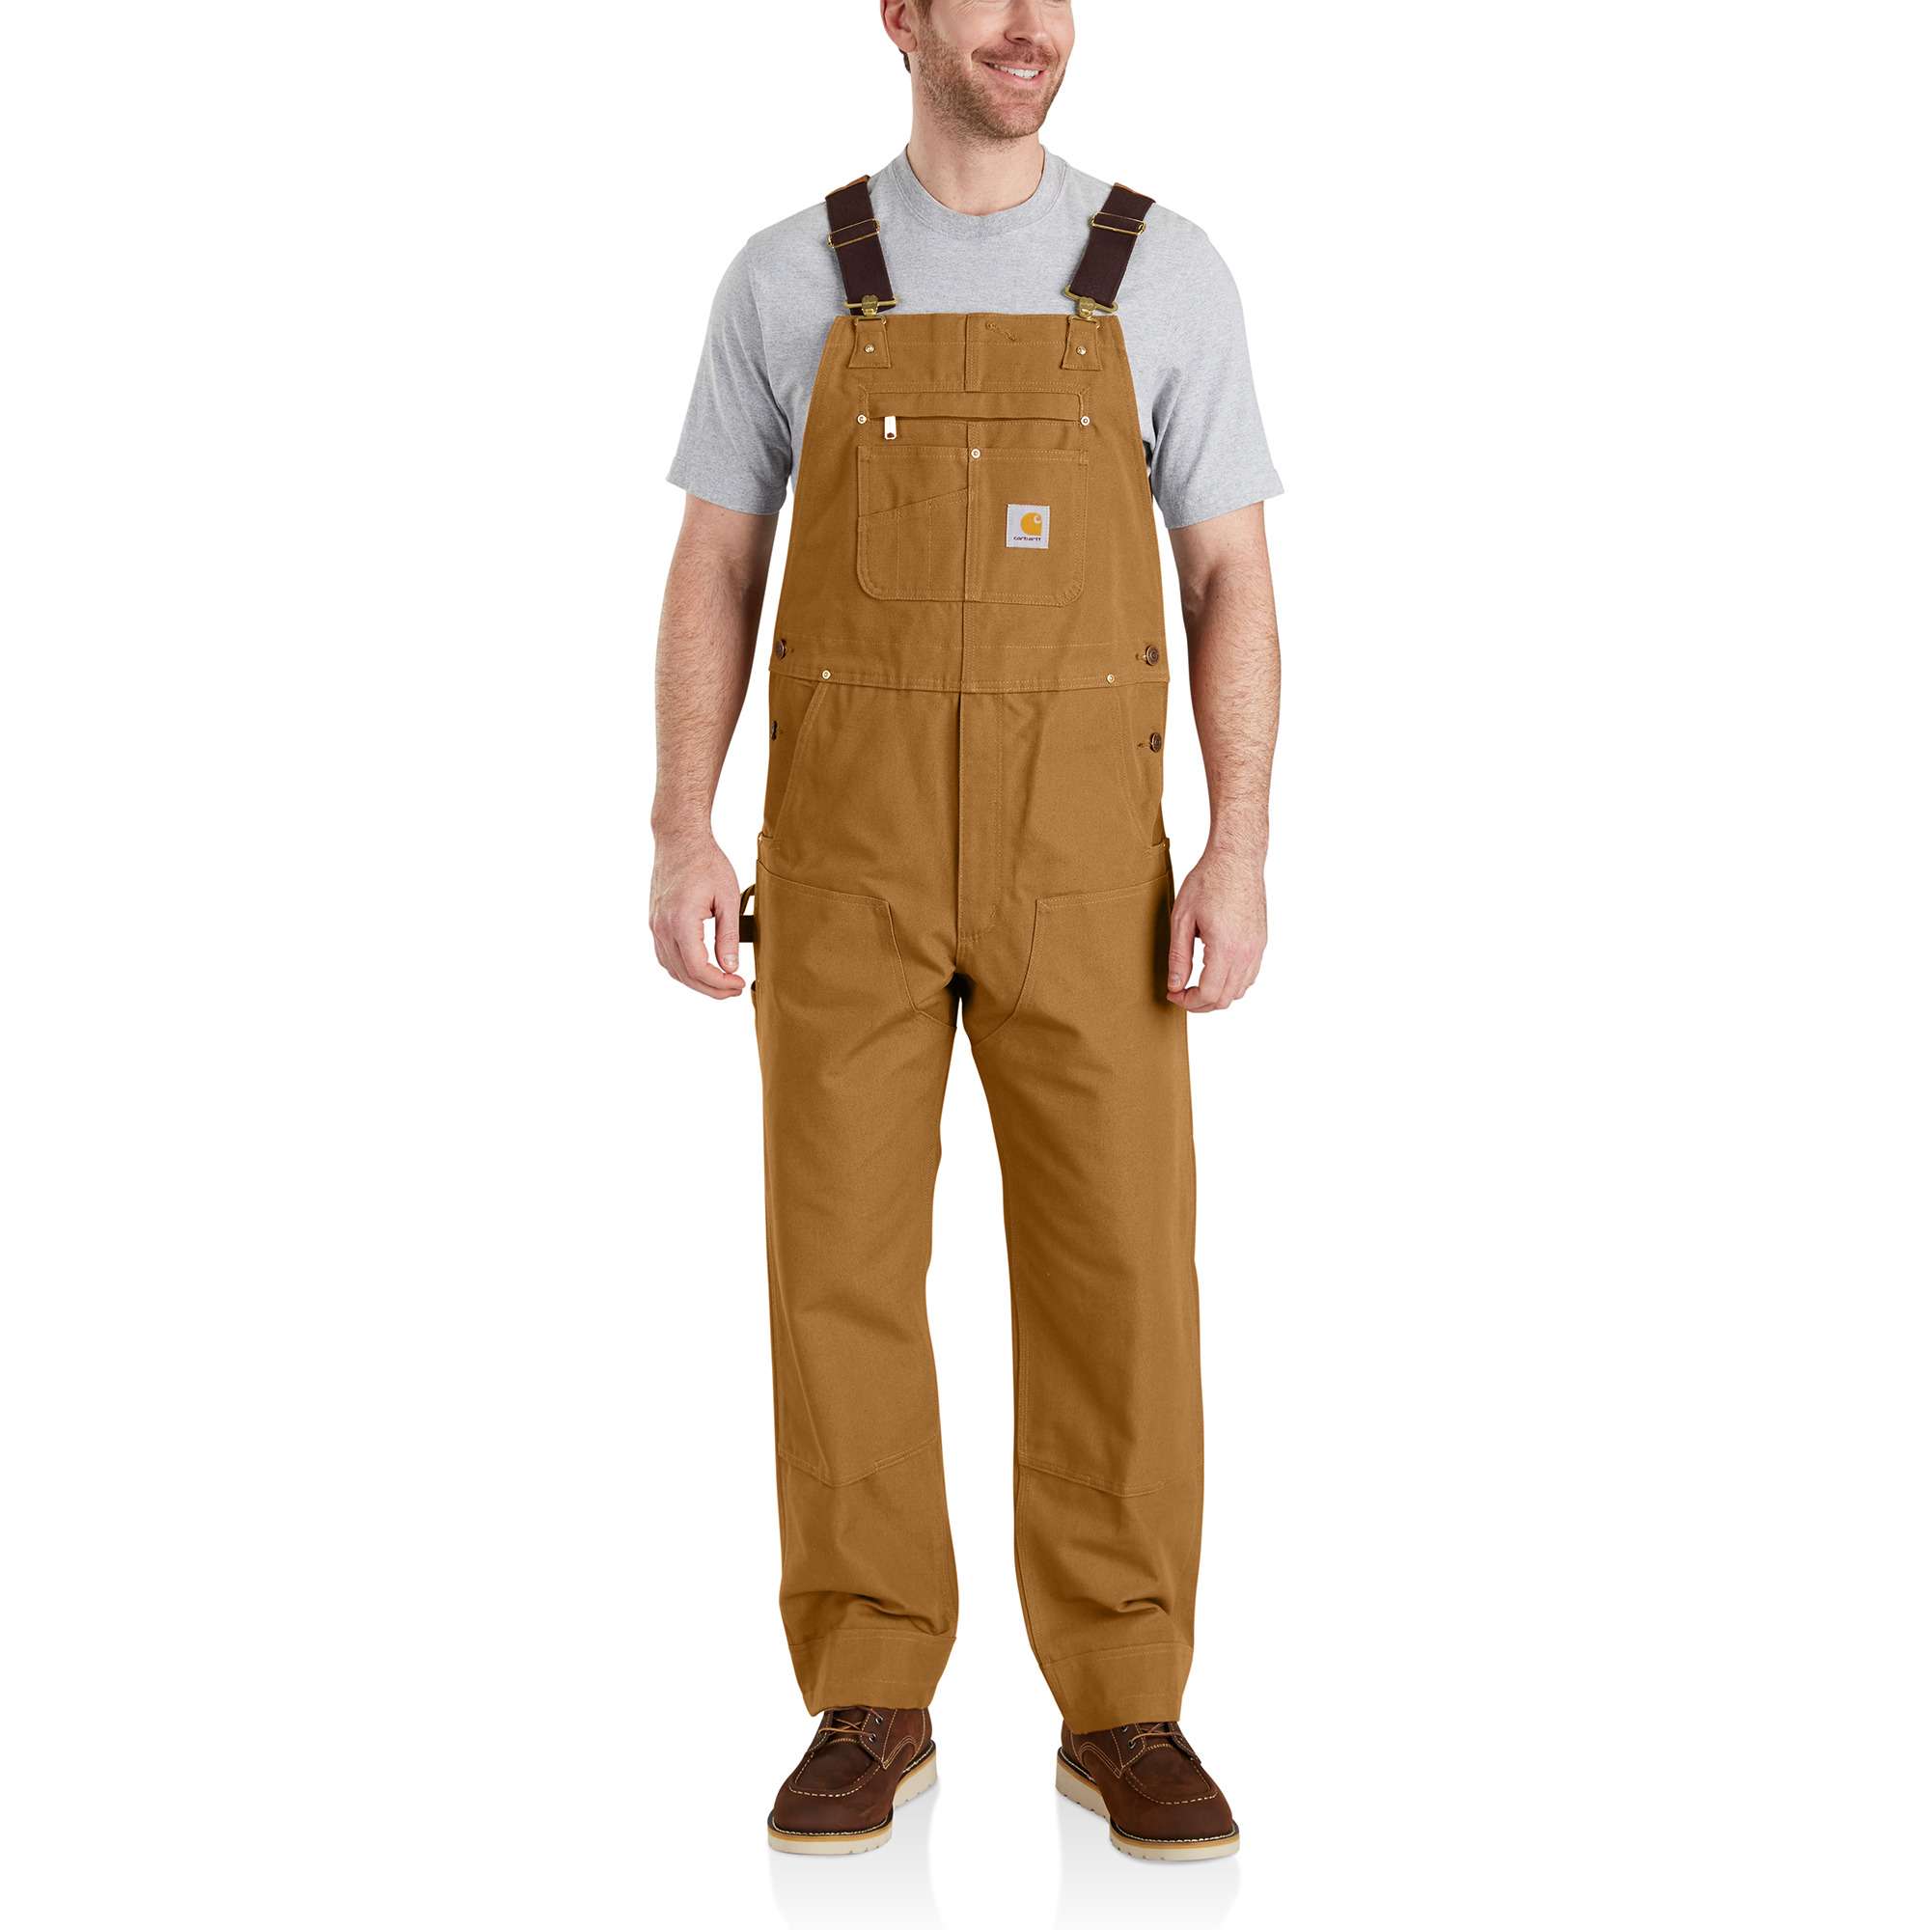 Carhartt Men's Double Front Work Dungarees, Brown, Size 34